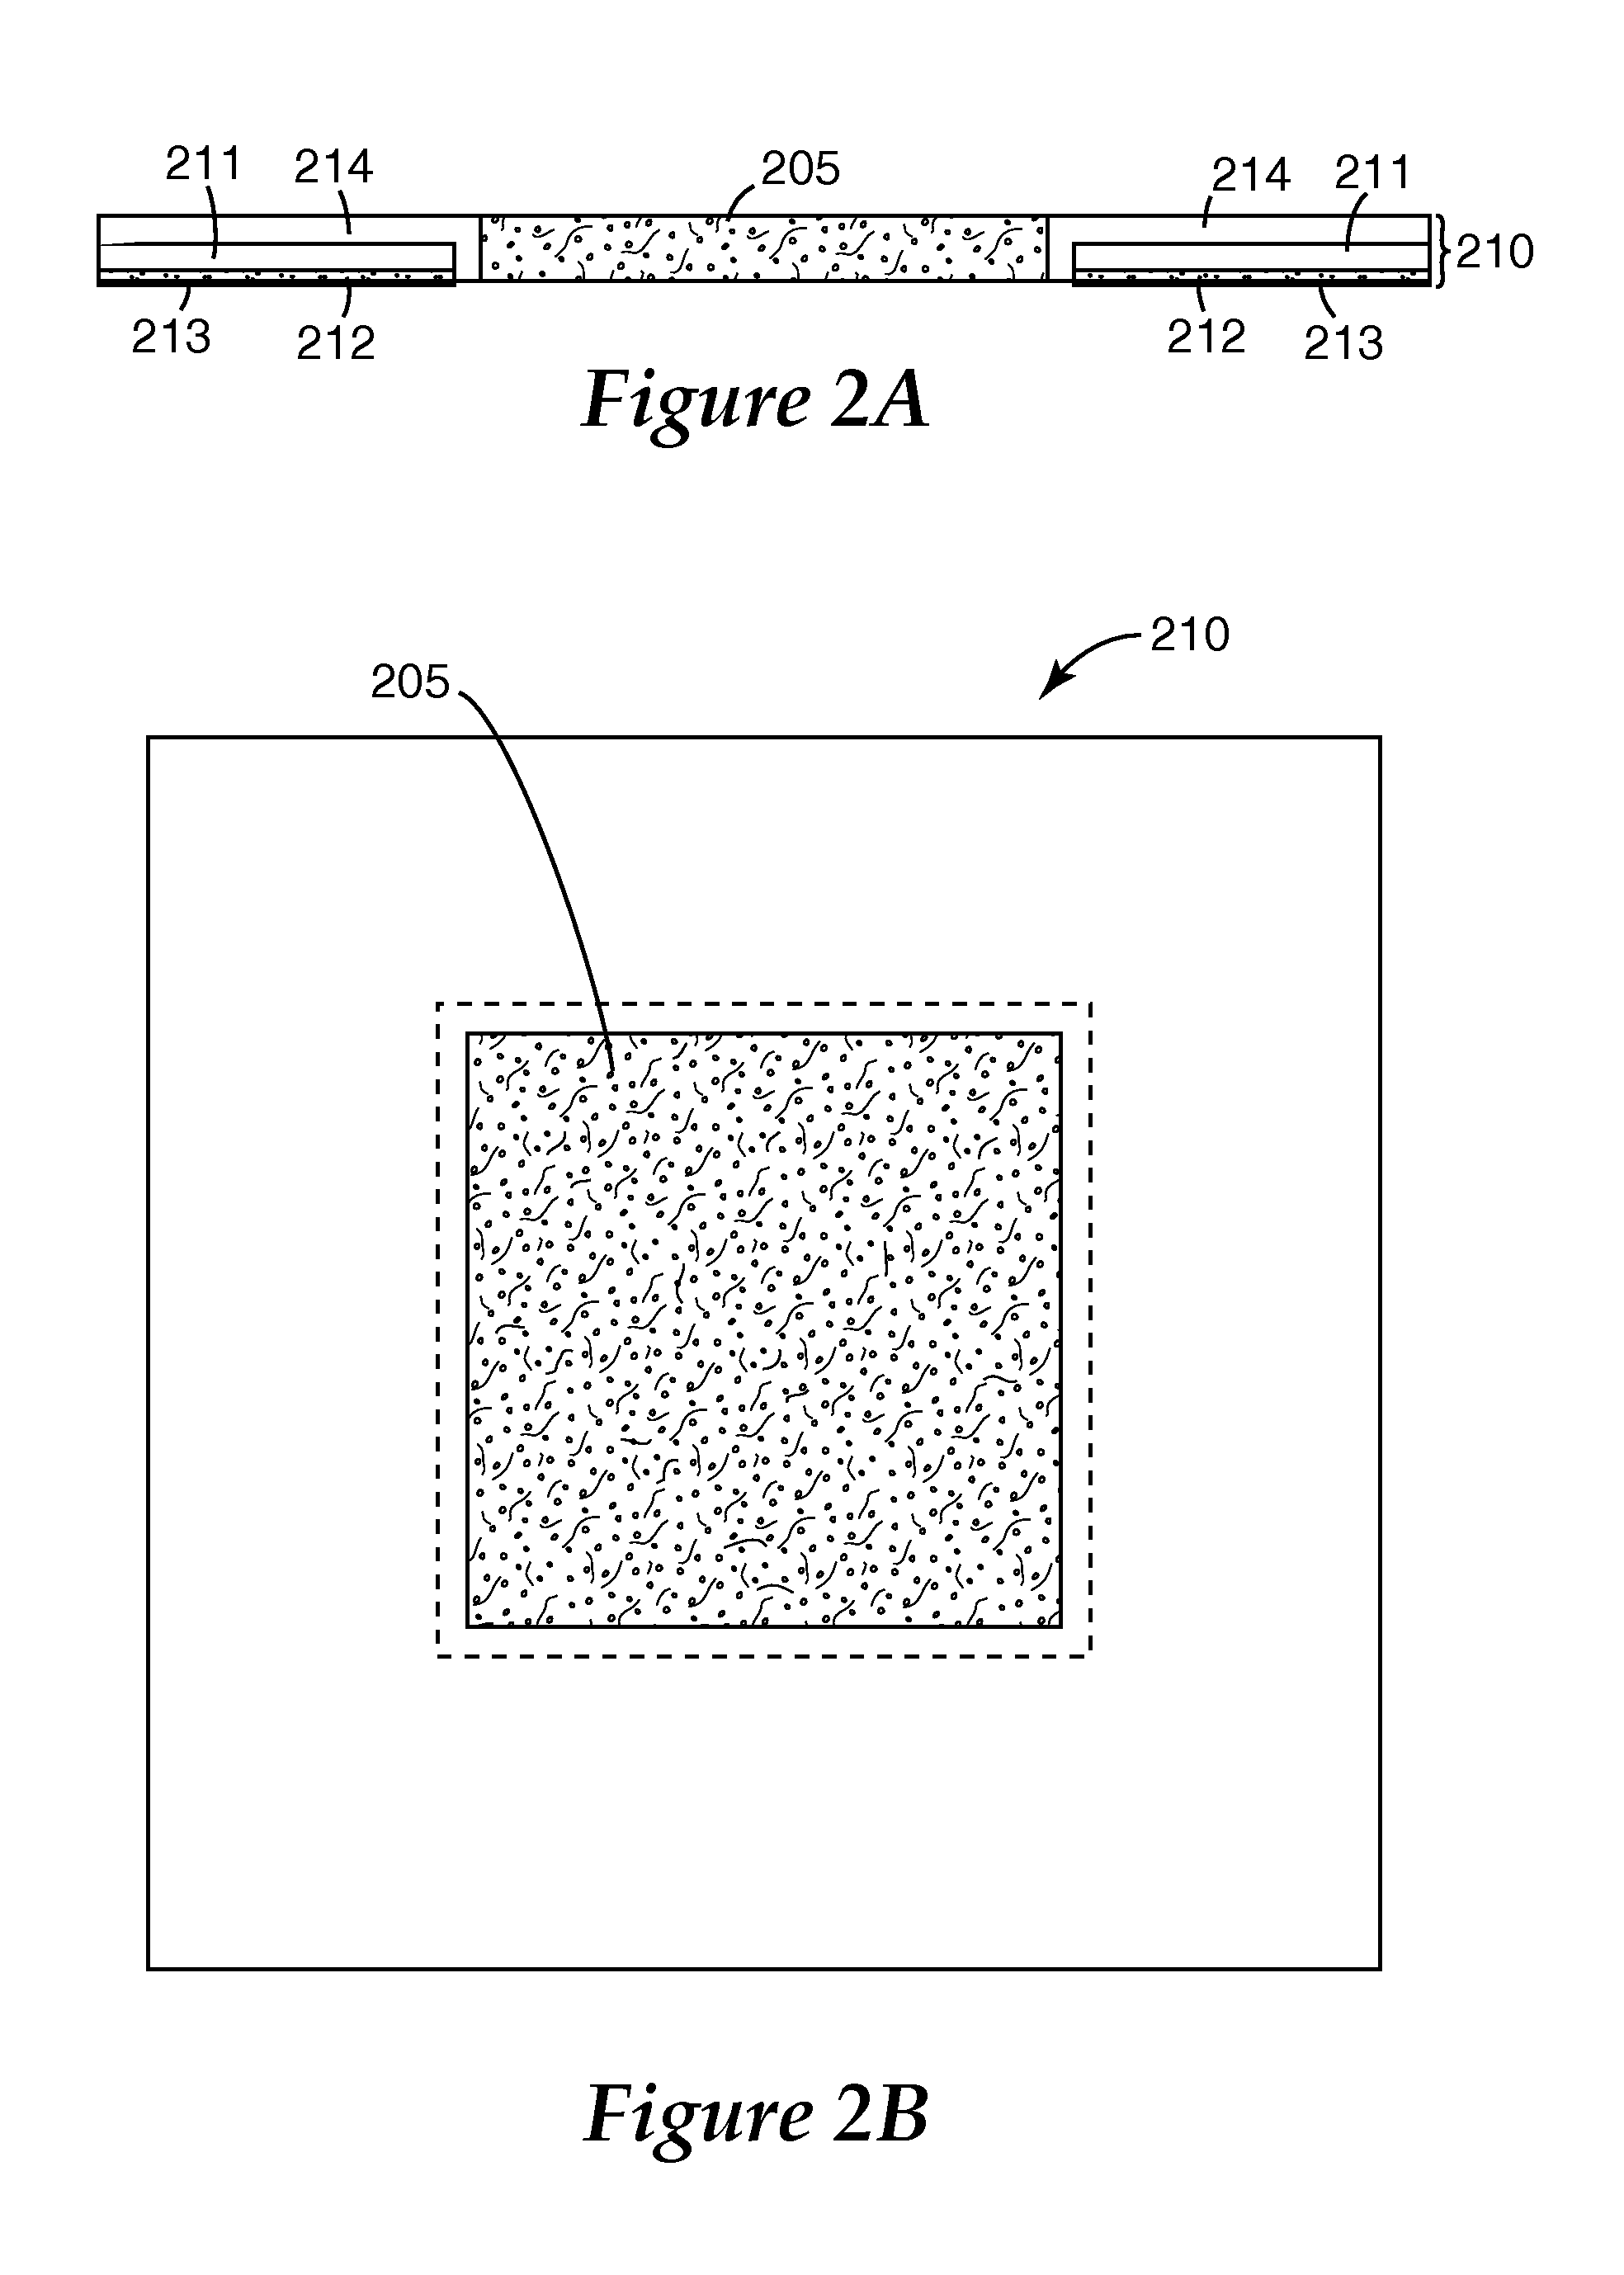 Gas diffusion layer incorporating a gasket